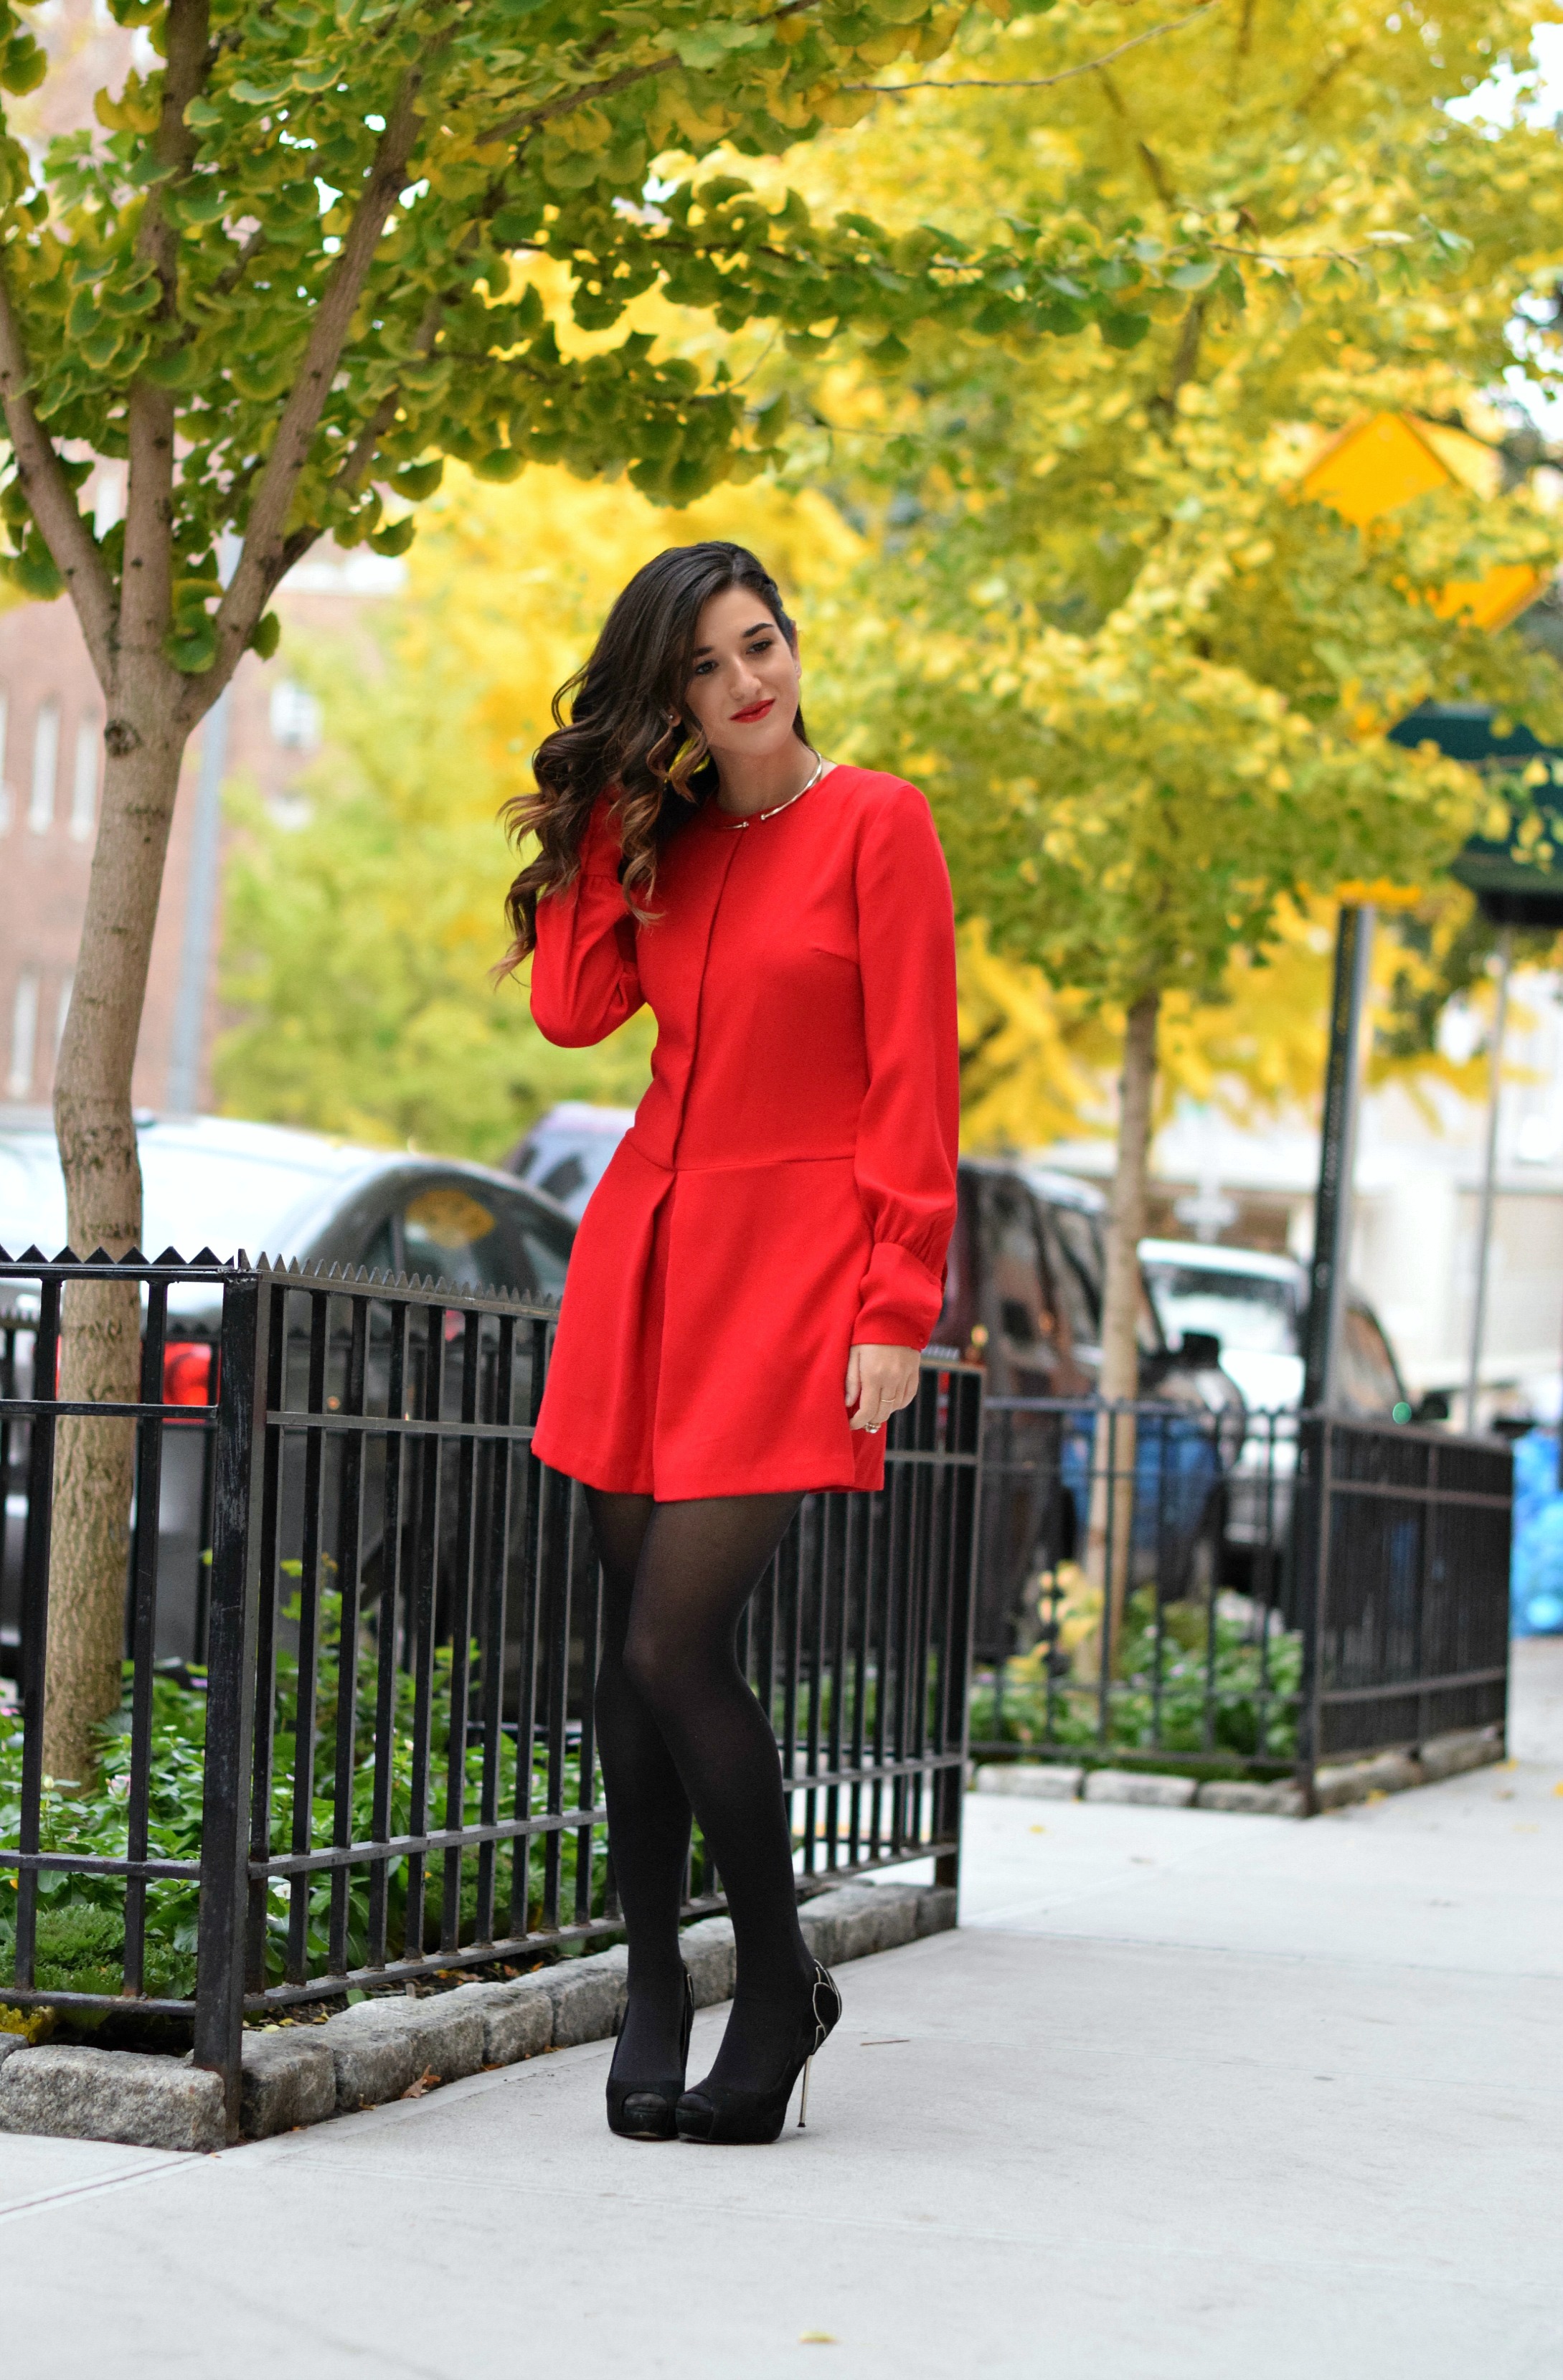 Red Romper Black Tights Louboutins & Love Fashion Blog Esther Santer NYC Street Style Blogger Winter Fall Look Shoes Heels Zara Gold Collar Necklace Braid Hair Inspo Outfit OOTD Photoshoot NYC Girl Women Stiletto Model Wear Shop Clothing Accessories.jpg